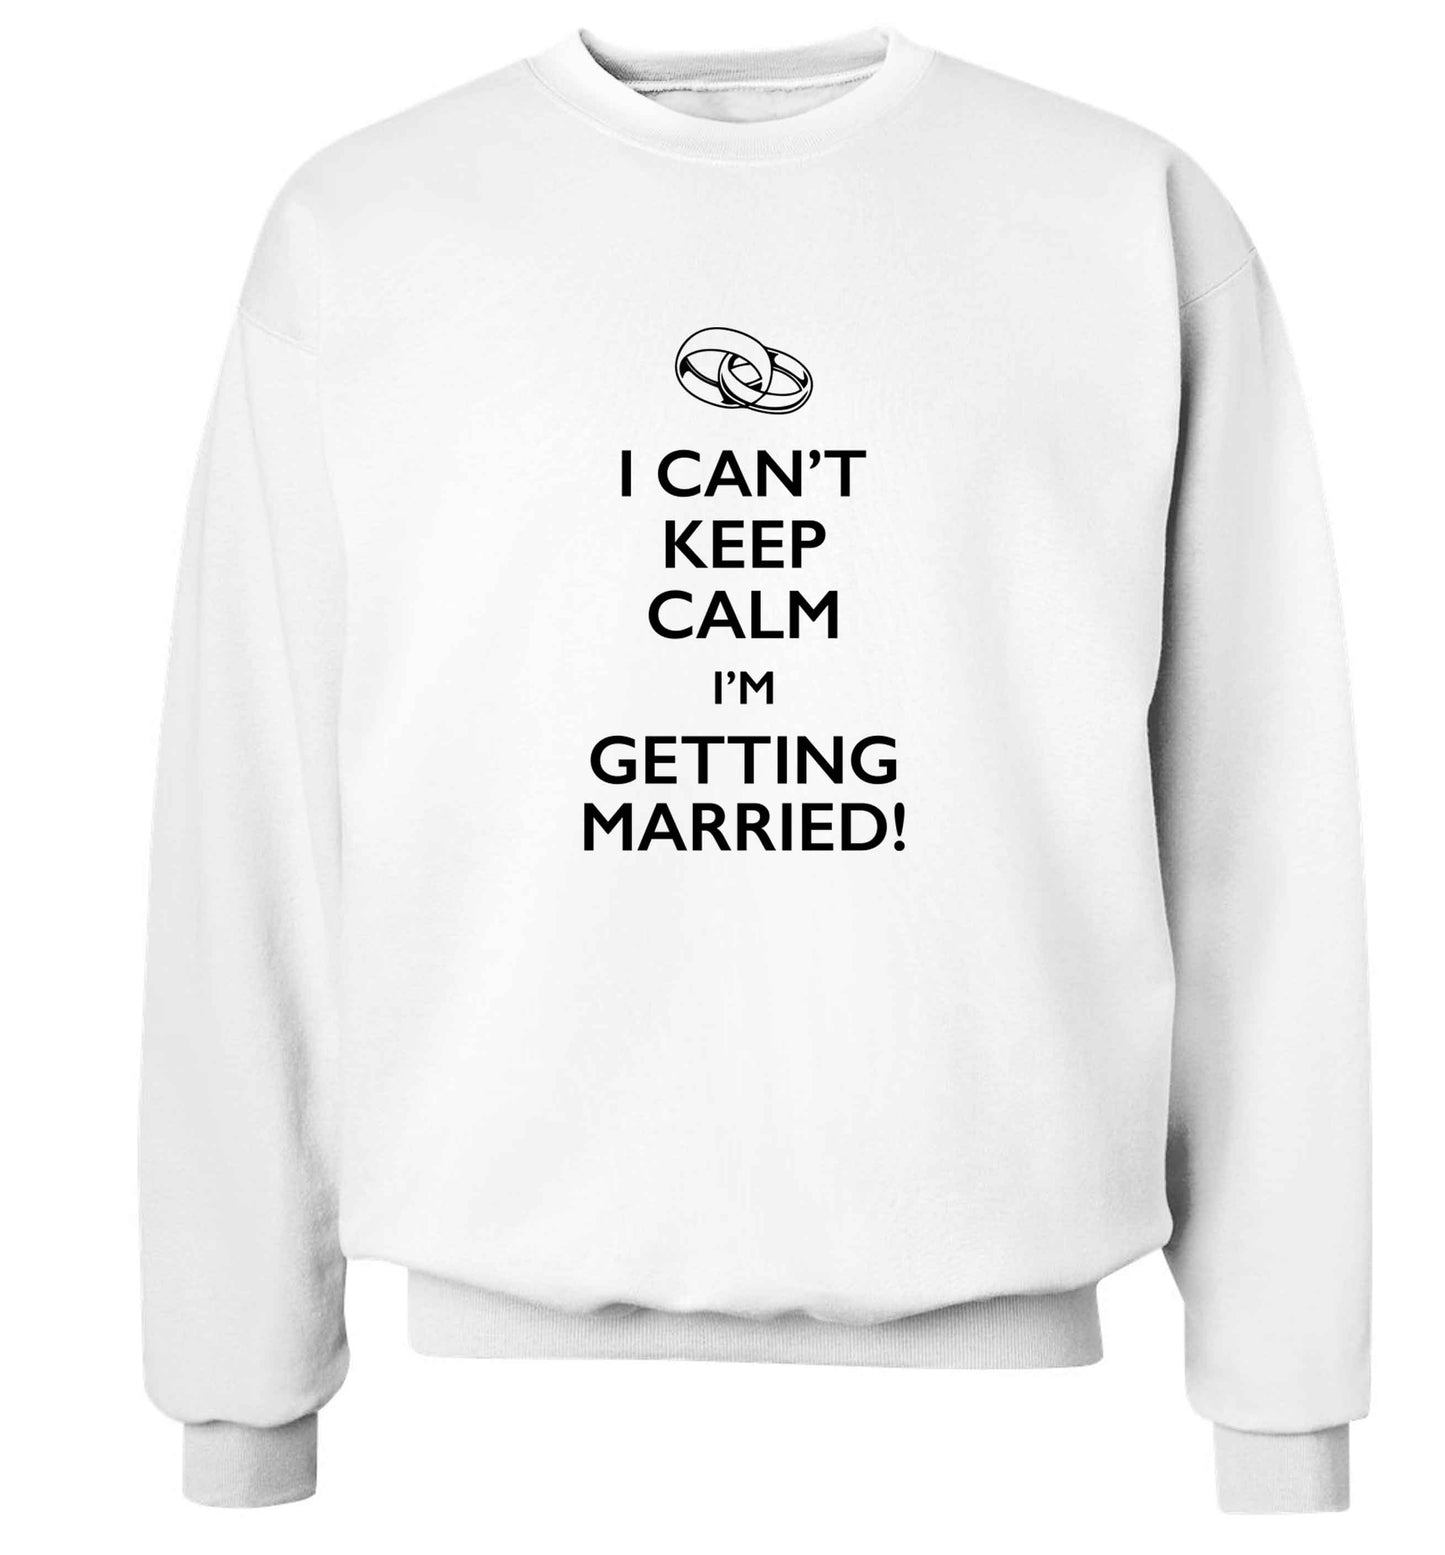 I can't keep calm I'm getting married! adult's unisex white sweater 2XL